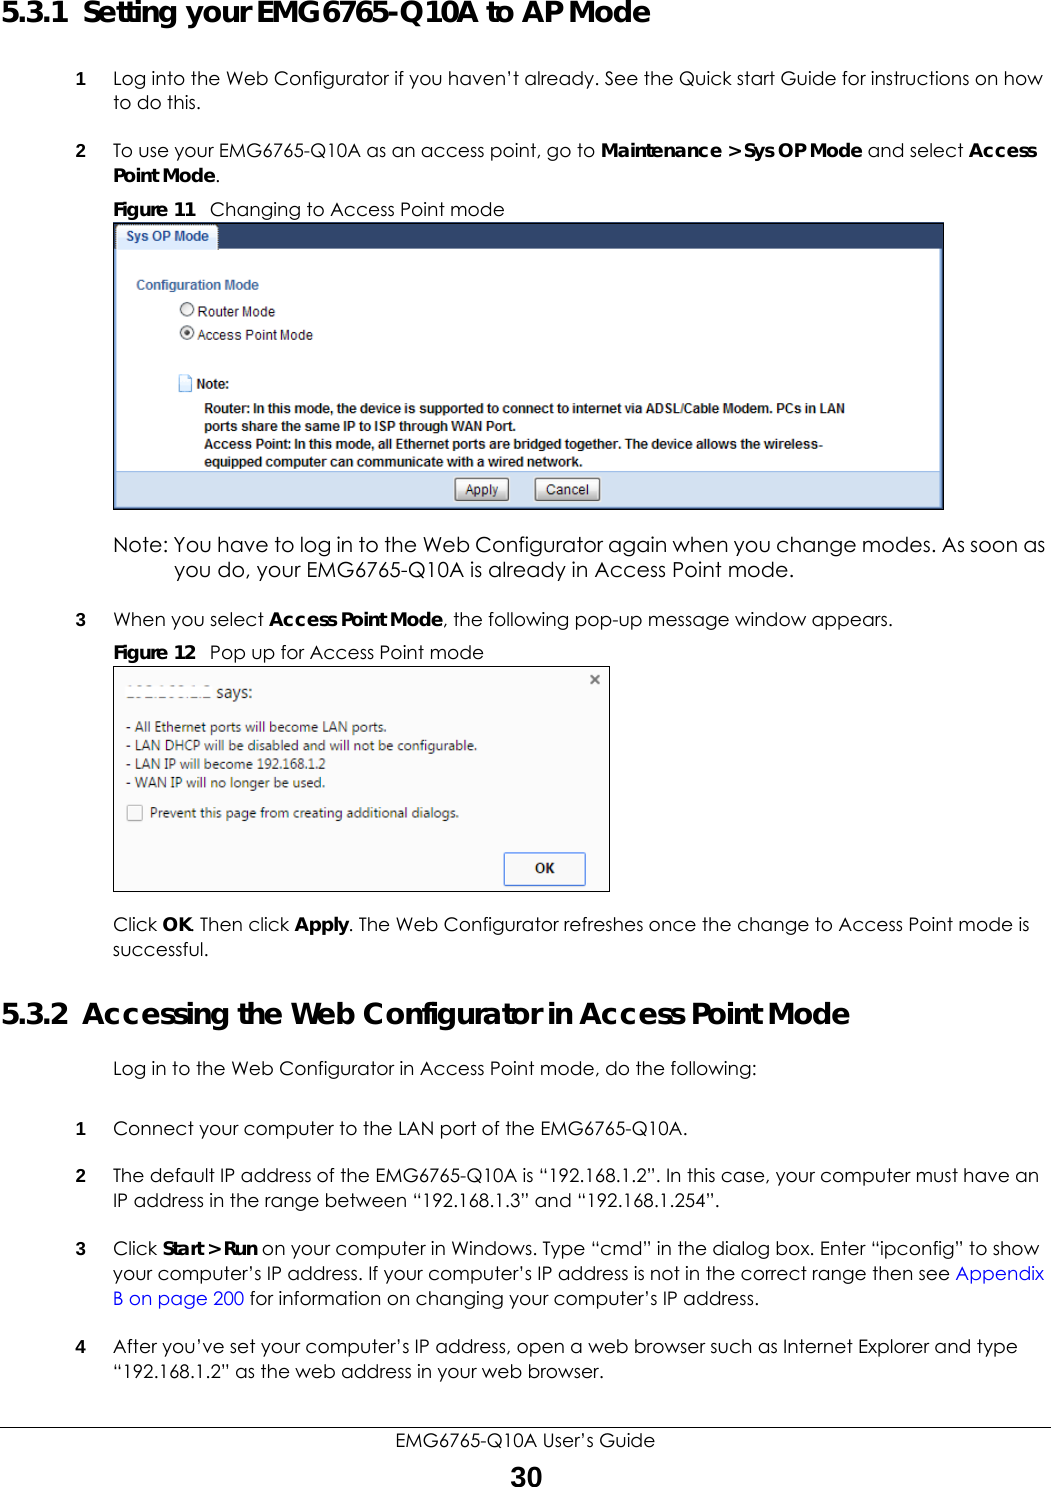 EMG6765-Q10A User’s Guide305.3.1  Setting your EMG6765-Q10A to AP Mode1Log into the Web Configurator if you haven’t already. See the Quick start Guide for instructions on how to do this.2To use your EMG6765-Q10A as an access point, go to Maintenance &gt; Sys OP Mode and select Access Point Mode. Figure 11   Changing to Access Point modeNote: You have to log in to the Web Configurator again when you change modes. As soon as you do, your EMG6765-Q10A is already in Access Point mode.3When you select Access Point Mode, the following pop-up message window appears.Figure 12   Pop up for Access Point mode Click OK. Then click Apply. The Web Configurator refreshes once the change to Access Point mode is successful.5.3.2  Accessing the Web Configurator in Access Point ModeLog in to the Web Configurator in Access Point mode, do the following:1Connect your computer to the LAN port of the EMG6765-Q10A. 2The default IP address of the EMG6765-Q10A is “192.168.1.2”. In this case, your computer must have an IP address in the range between “192.168.1.3” and “192.168.1.254”.3Click Start &gt; Run on your computer in Windows. Type “cmd” in the dialog box. Enter “ipconfig” to show your computer’s IP address. If your computer’s IP address is not in the correct range then see Appendix B on page 200 for information on changing your computer’s IP address.4After you’ve set your computer’s IP address, open a web browser such as Internet Explorer and type “192.168.1.2” as the web address in your web browser.